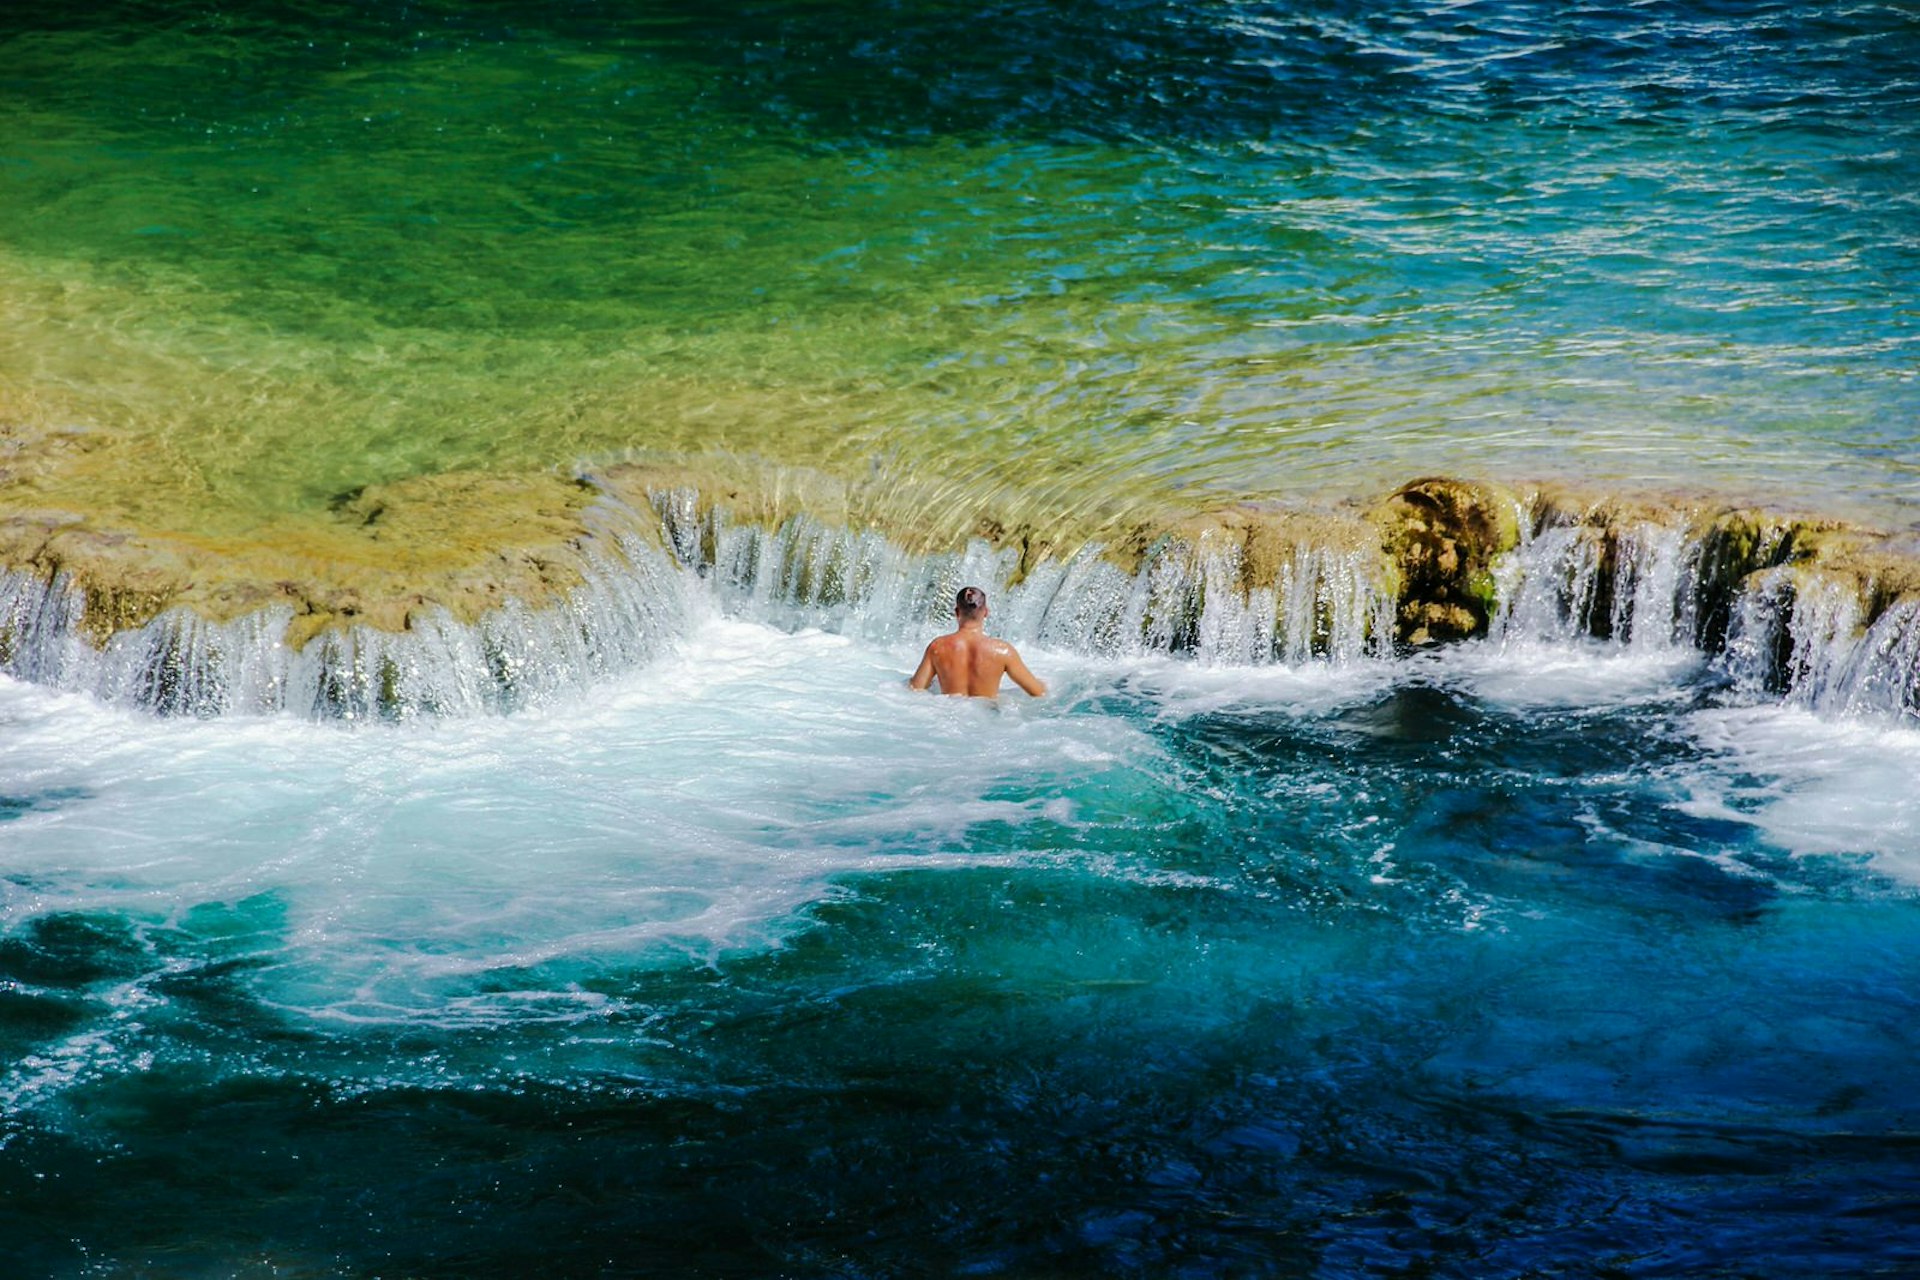 Cooling off in one of Krka National Park's many waterfalls